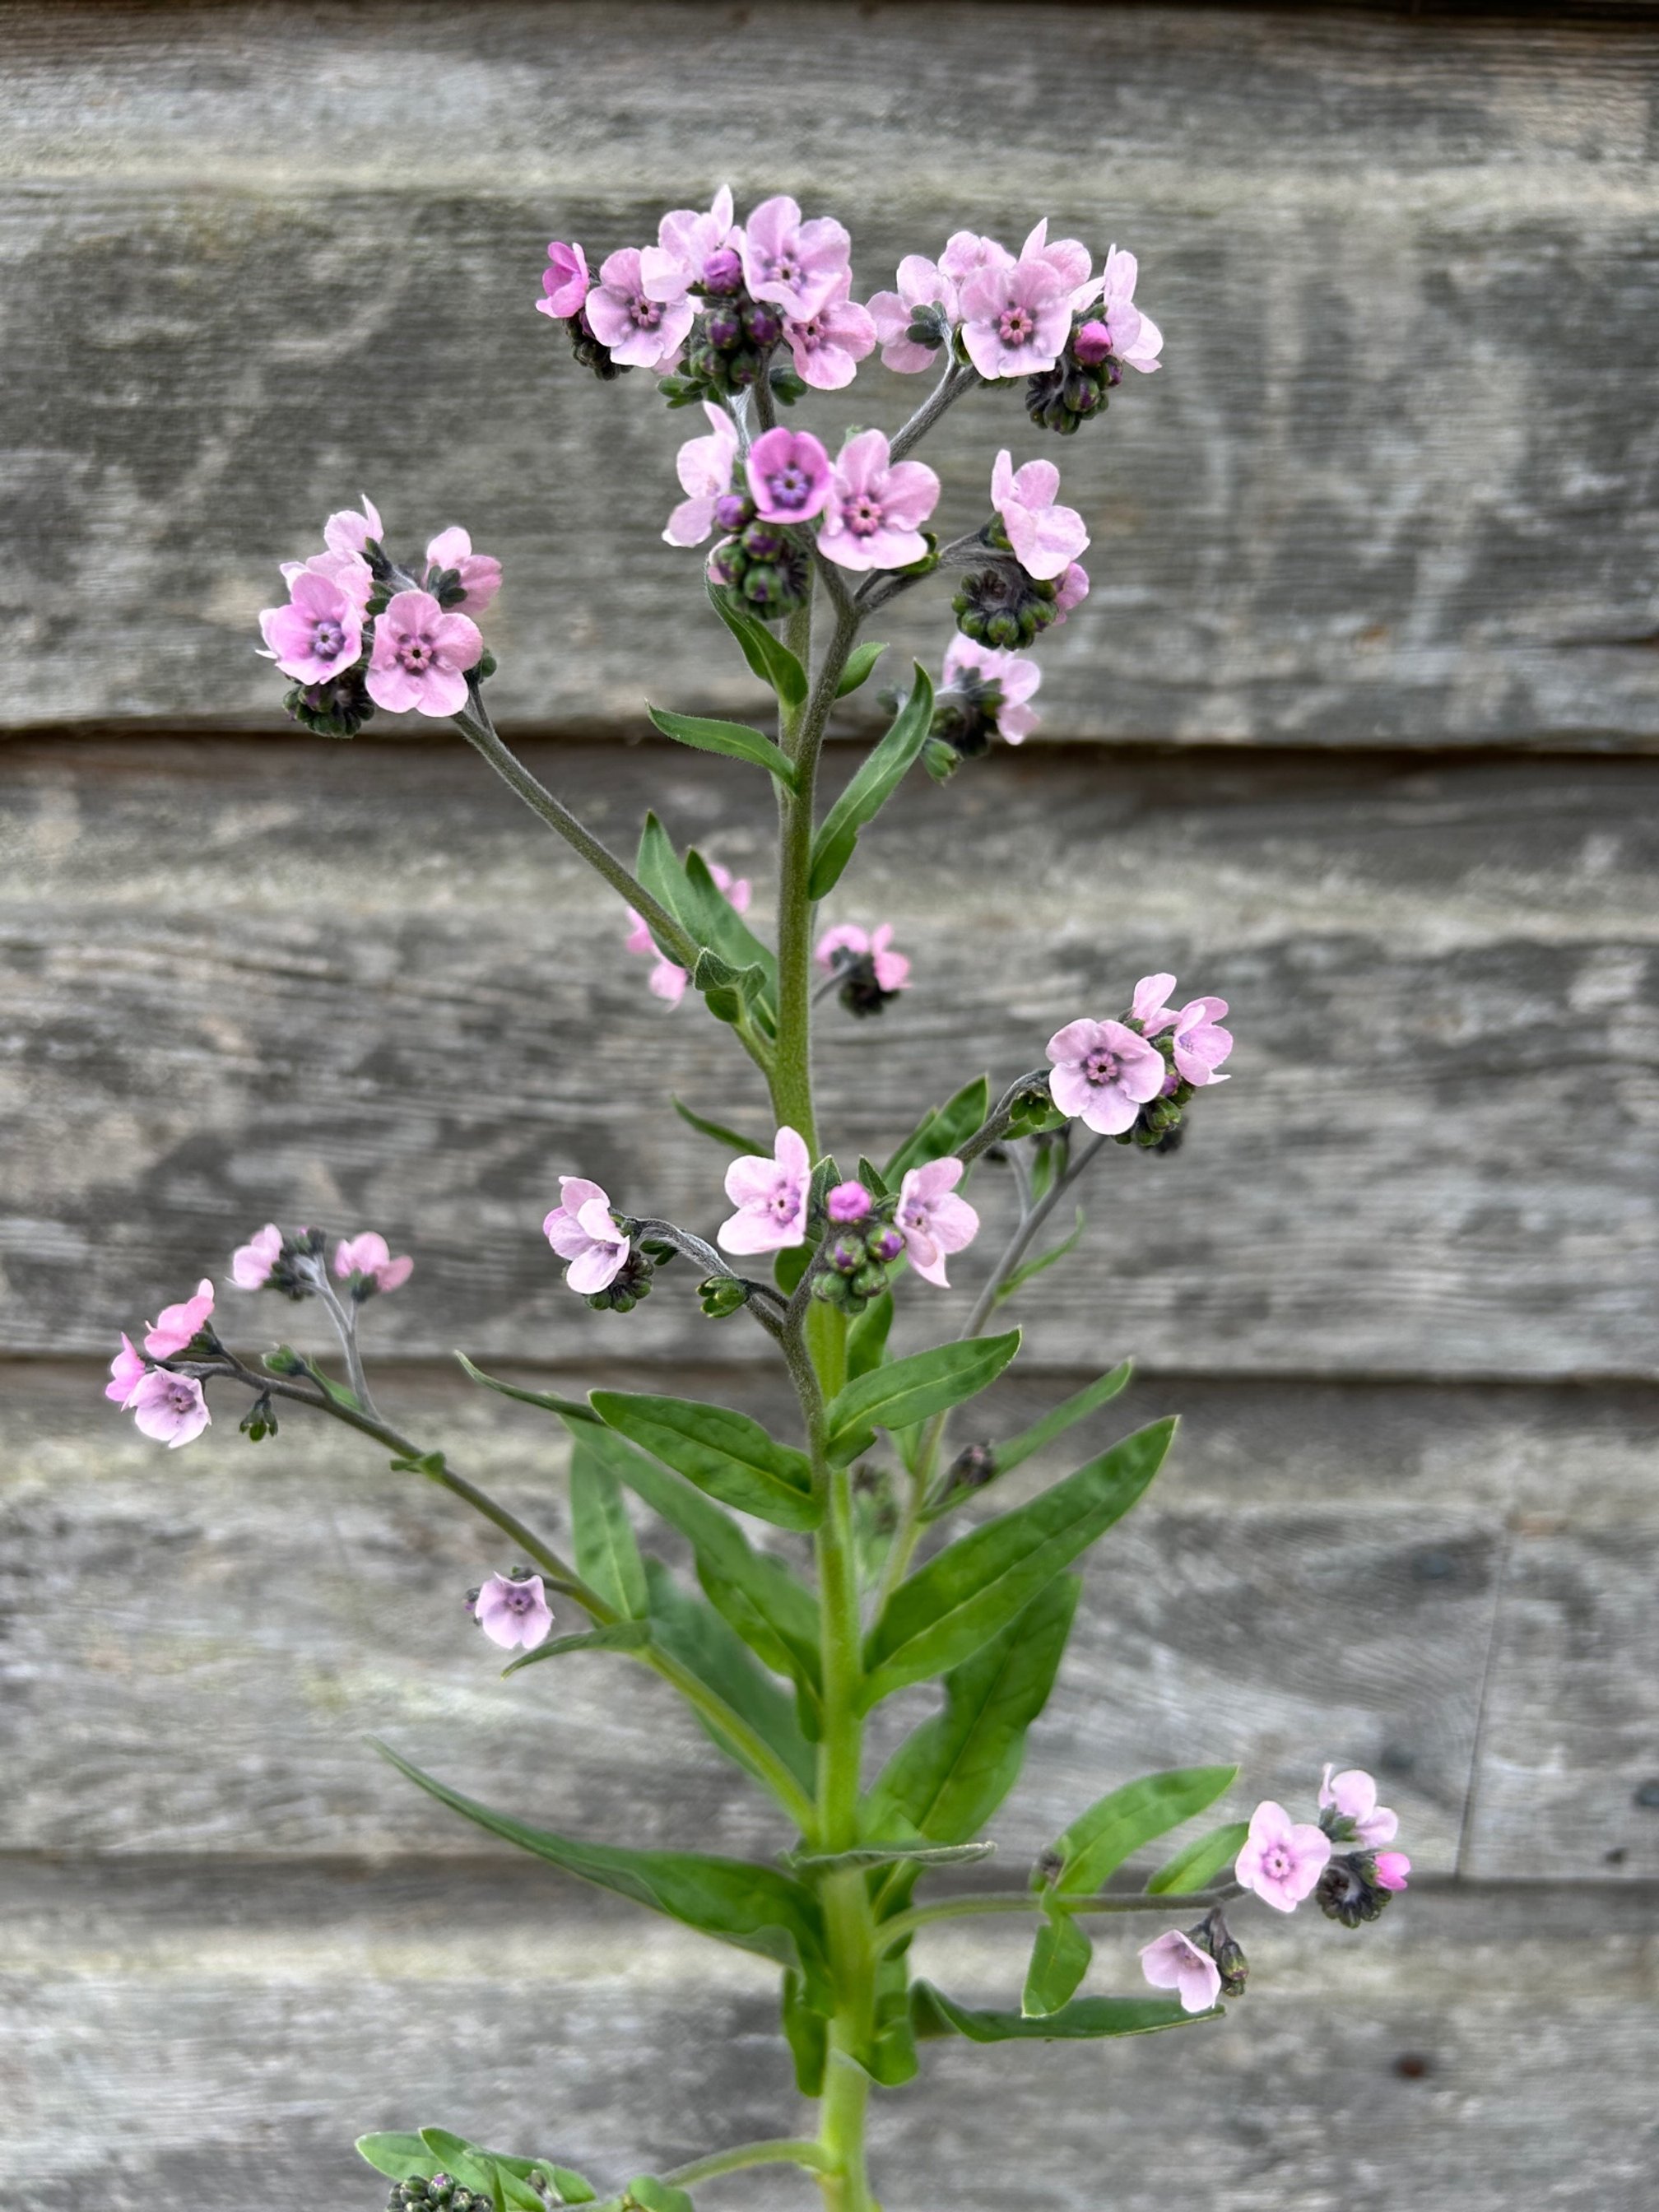 Chinese Forget-Me-Not Seeds - Mystic Pink Flower Seeds